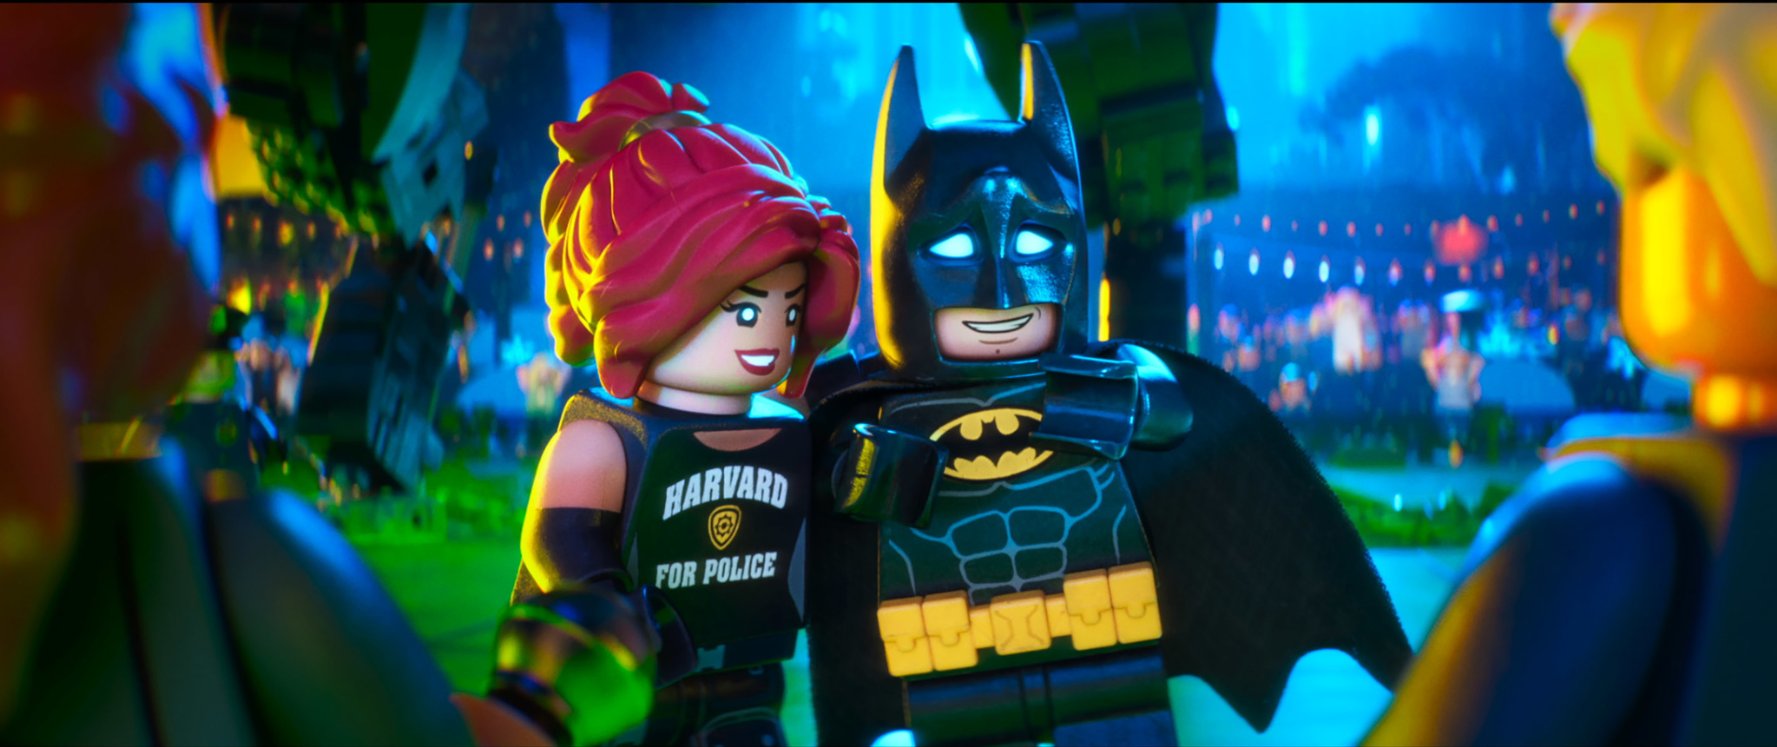 The Lego Batman Movie Proves The Need For A Lighthearted Batman 1